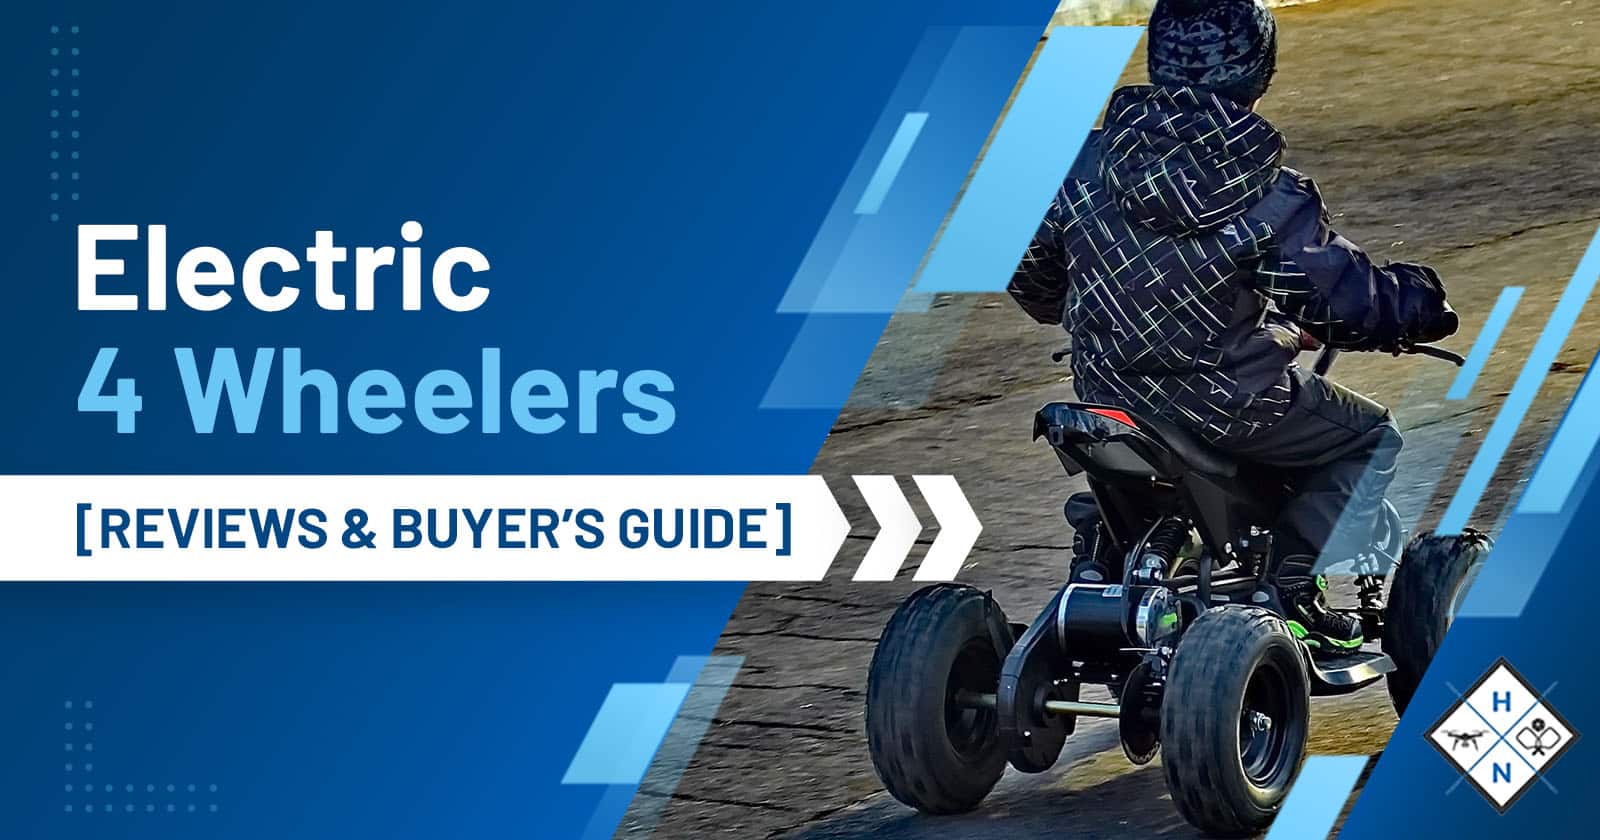 Electric 4 Wheelers [REVIEWS & BUYER’S GUIDE]